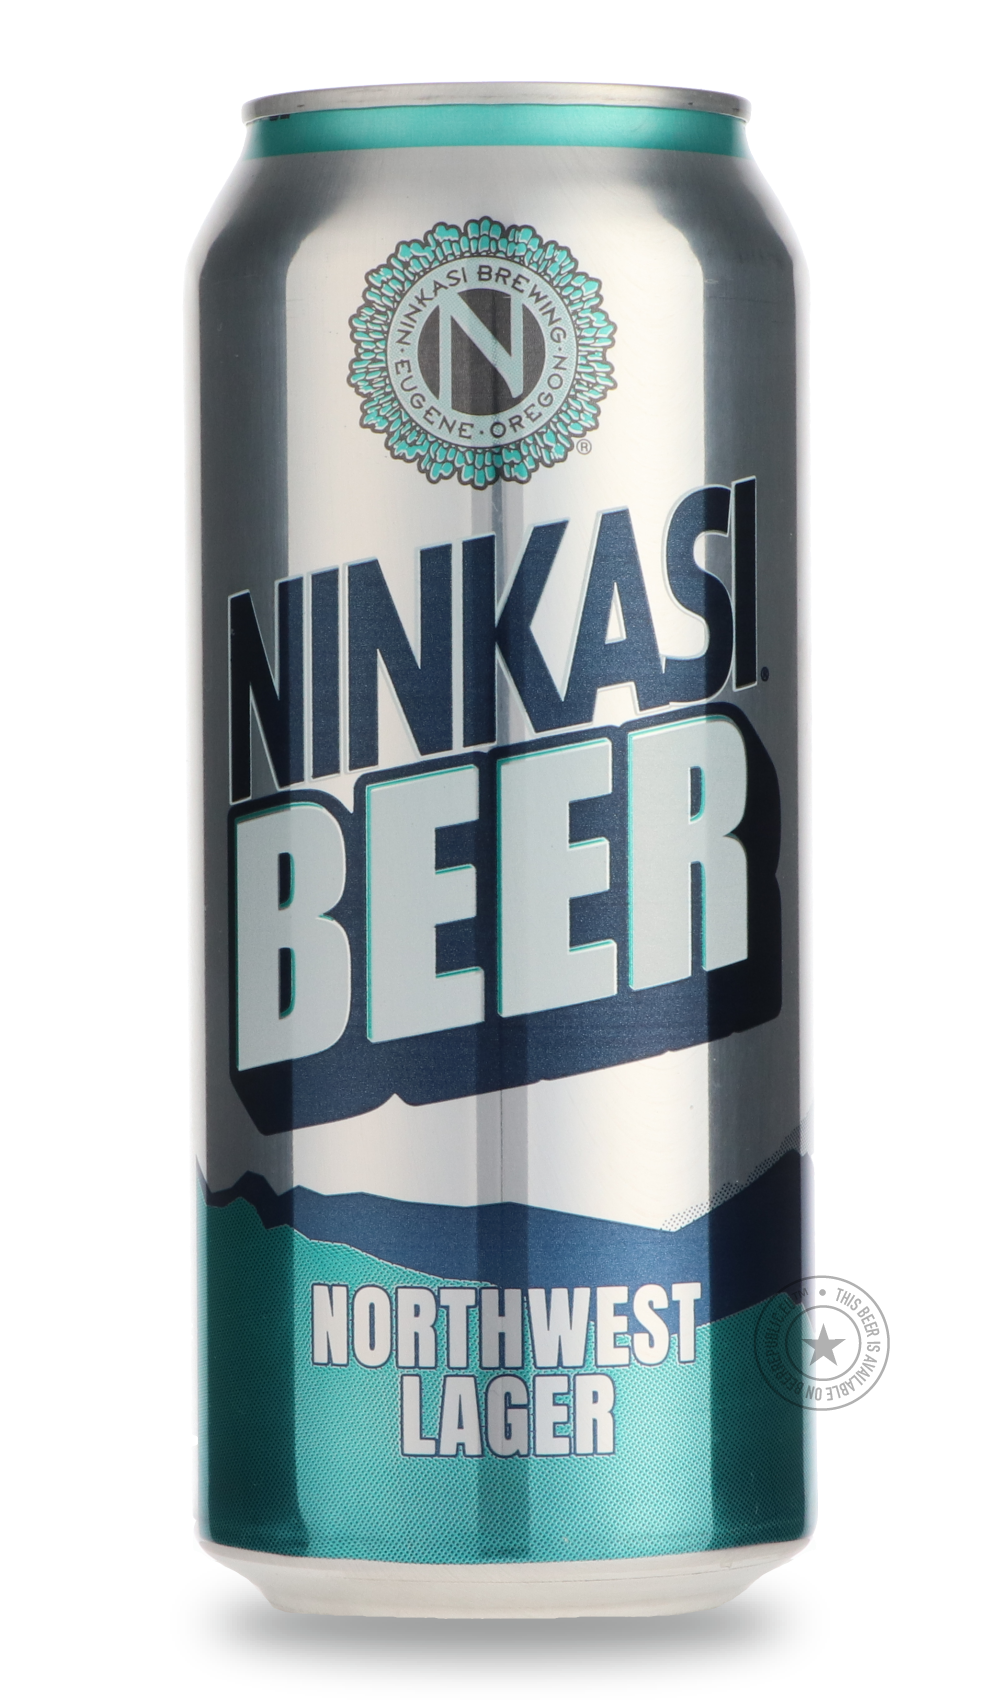 -Ninkasi- Ninkasi Beer Northwest Lager-Pale- Only @ Beer Republic - The best online beer store for American & Canadian craft beer - Buy beer online from the USA and Canada - Bier online kopen - Amerikaans bier kopen - Craft beer store - Craft beer kopen - Amerikanisch bier kaufen - Bier online kaufen - Acheter biere online - IPA - Stout - Porter - New England IPA - Hazy IPA - Imperial Stout - Barrel Aged - Barrel Aged Imperial Stout - Brown - Dark beer - Blond - Blonde - Pilsner - Lager - Wheat - Weizen - A